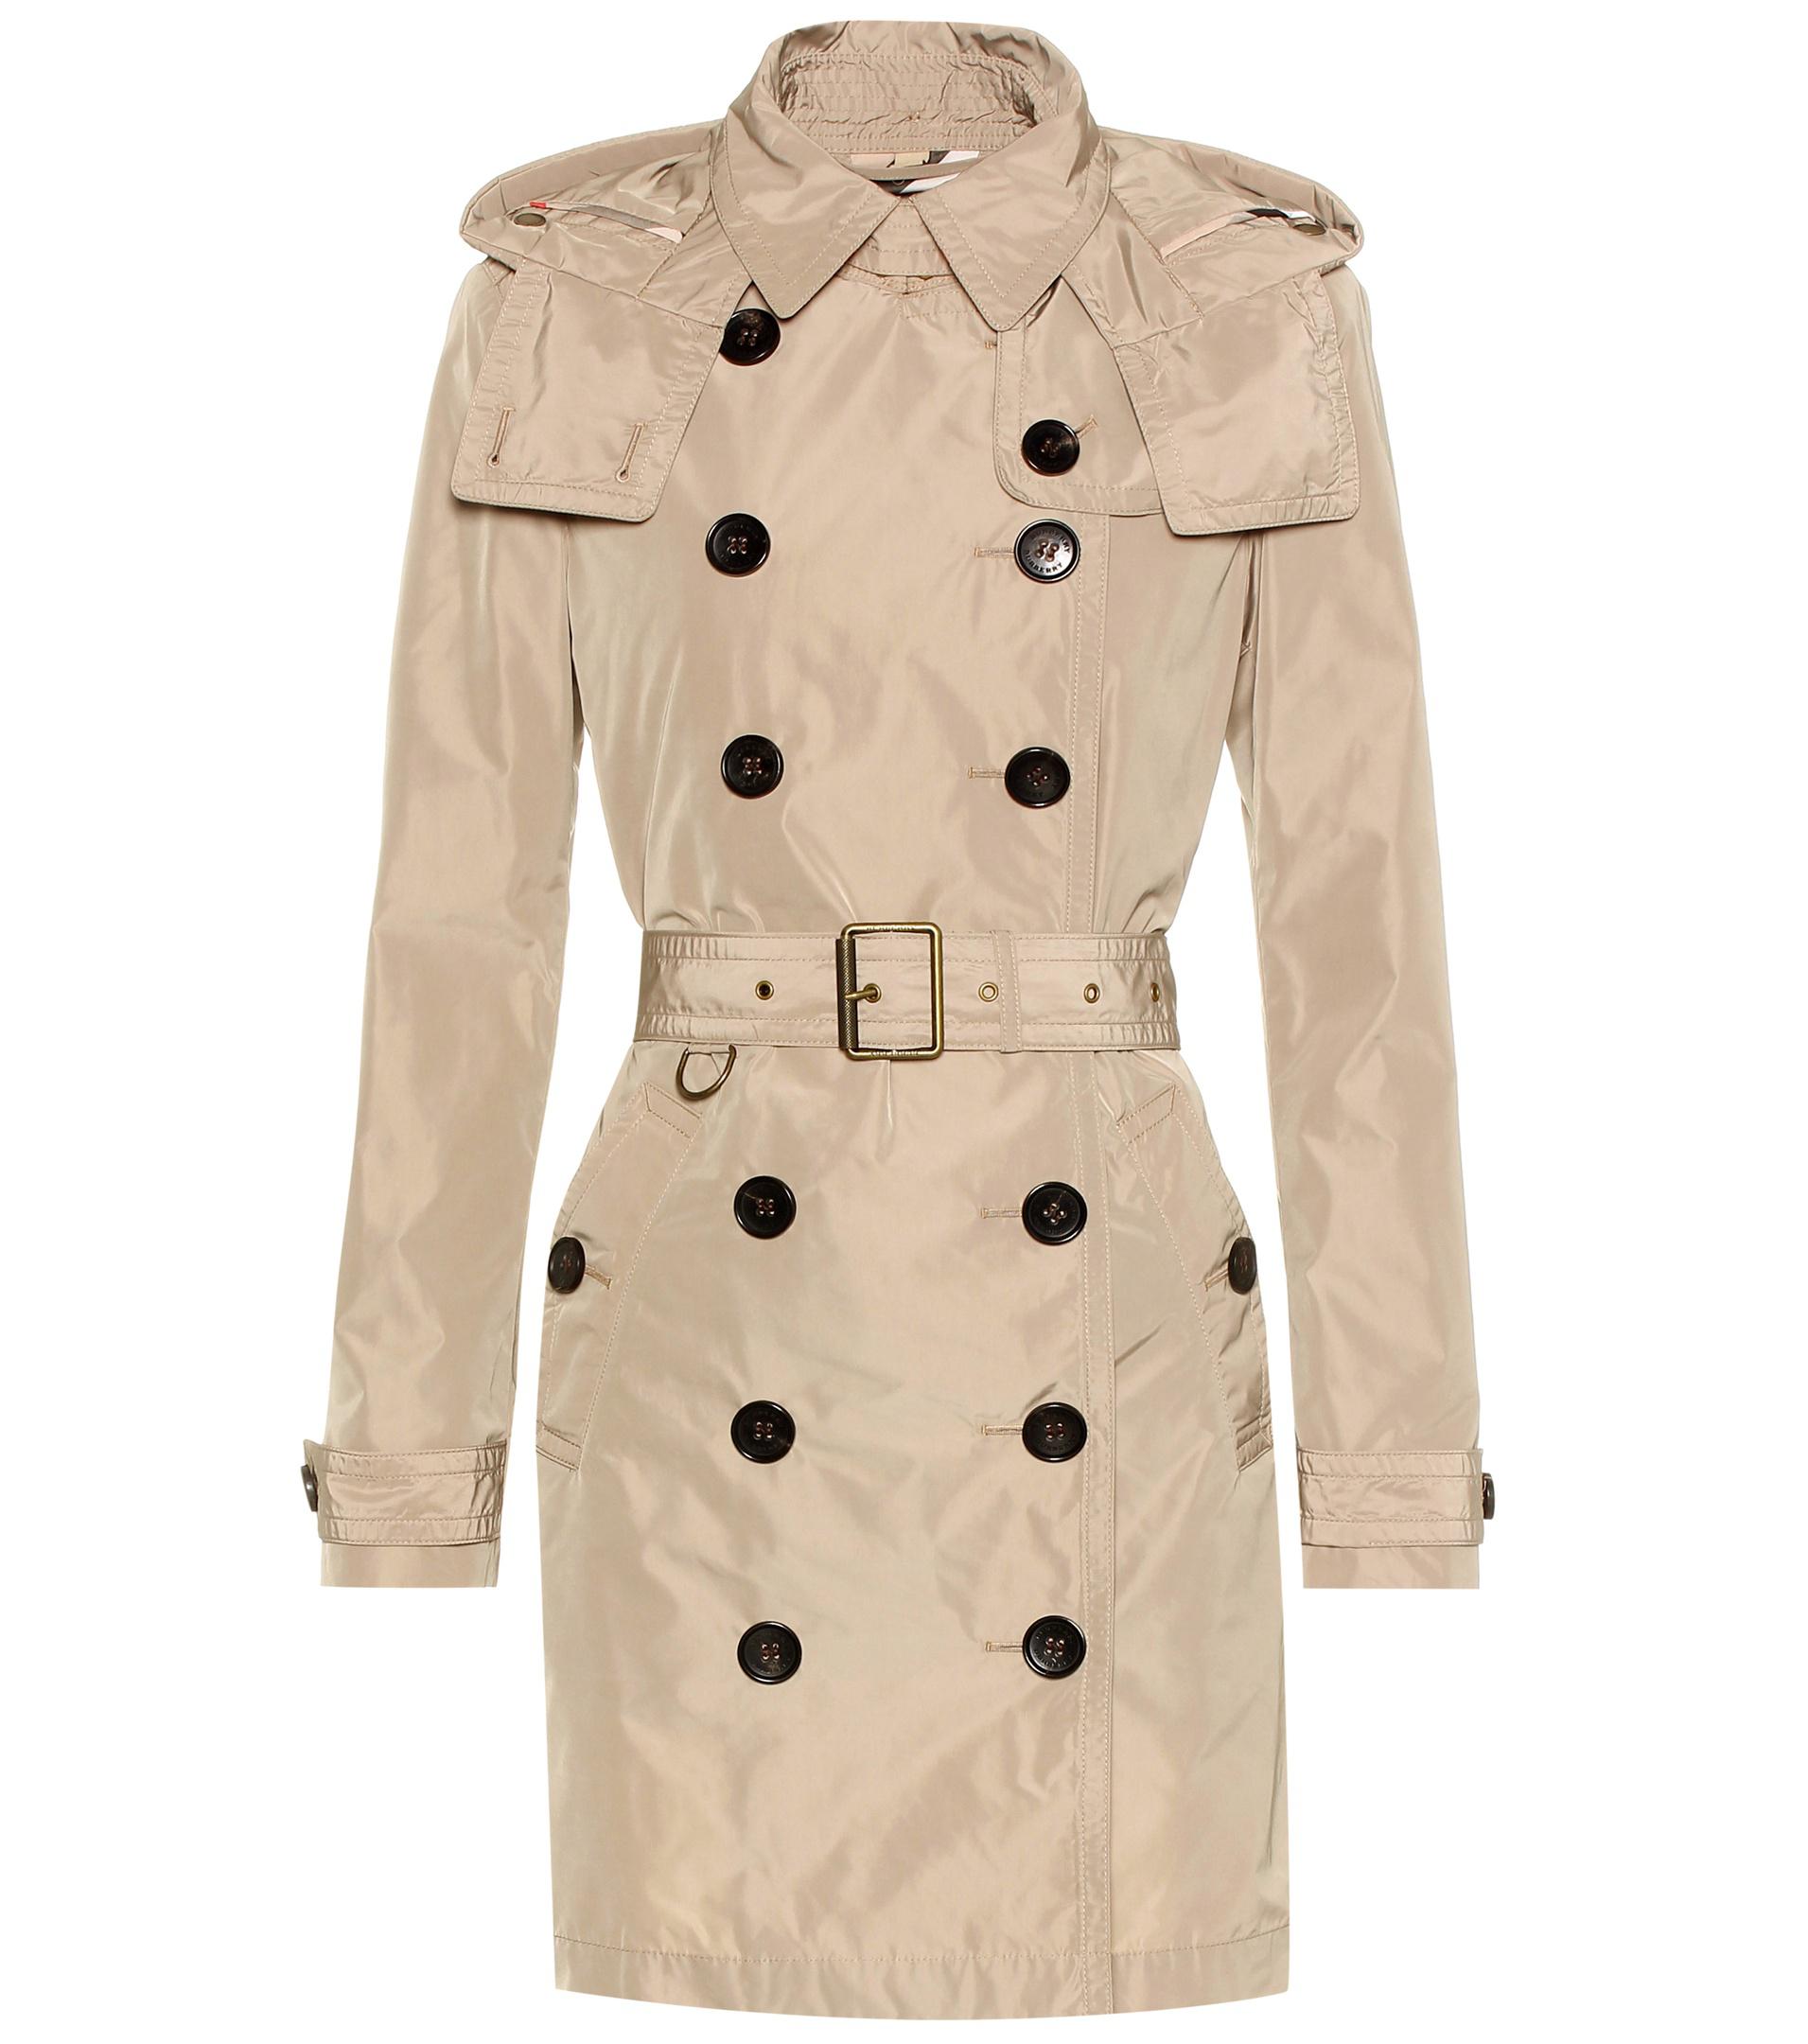 Burberry Balmoral Trench Coat in Beige (Natural) - Lyst